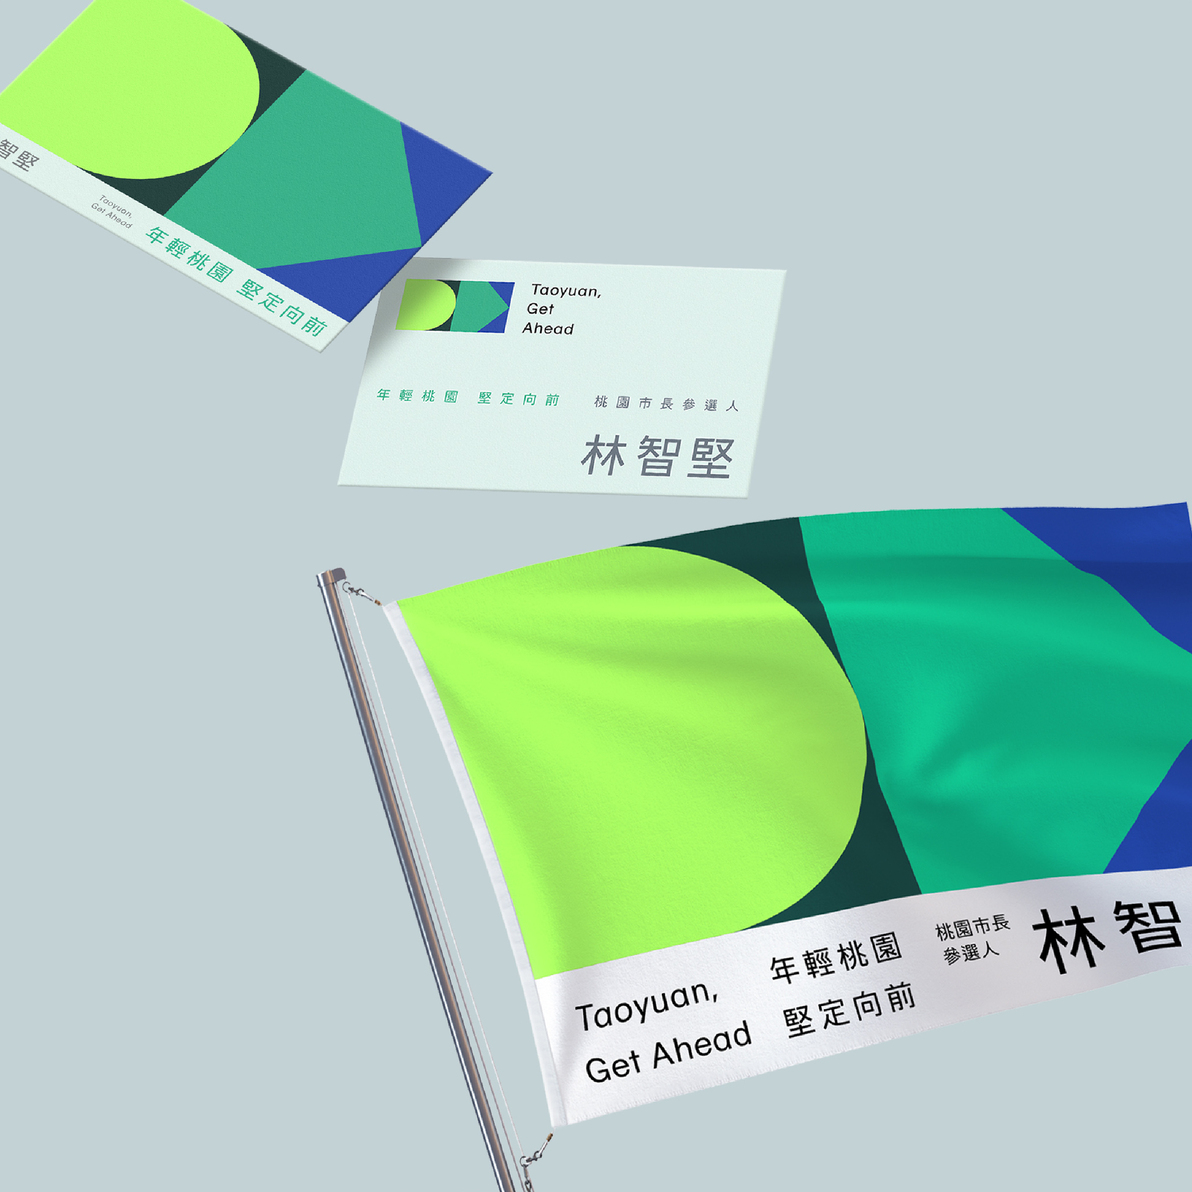 Visual Identity of 2022 Lin Chih-chien's Mayor Election Campaign in Taoyuan, Taiwan-2